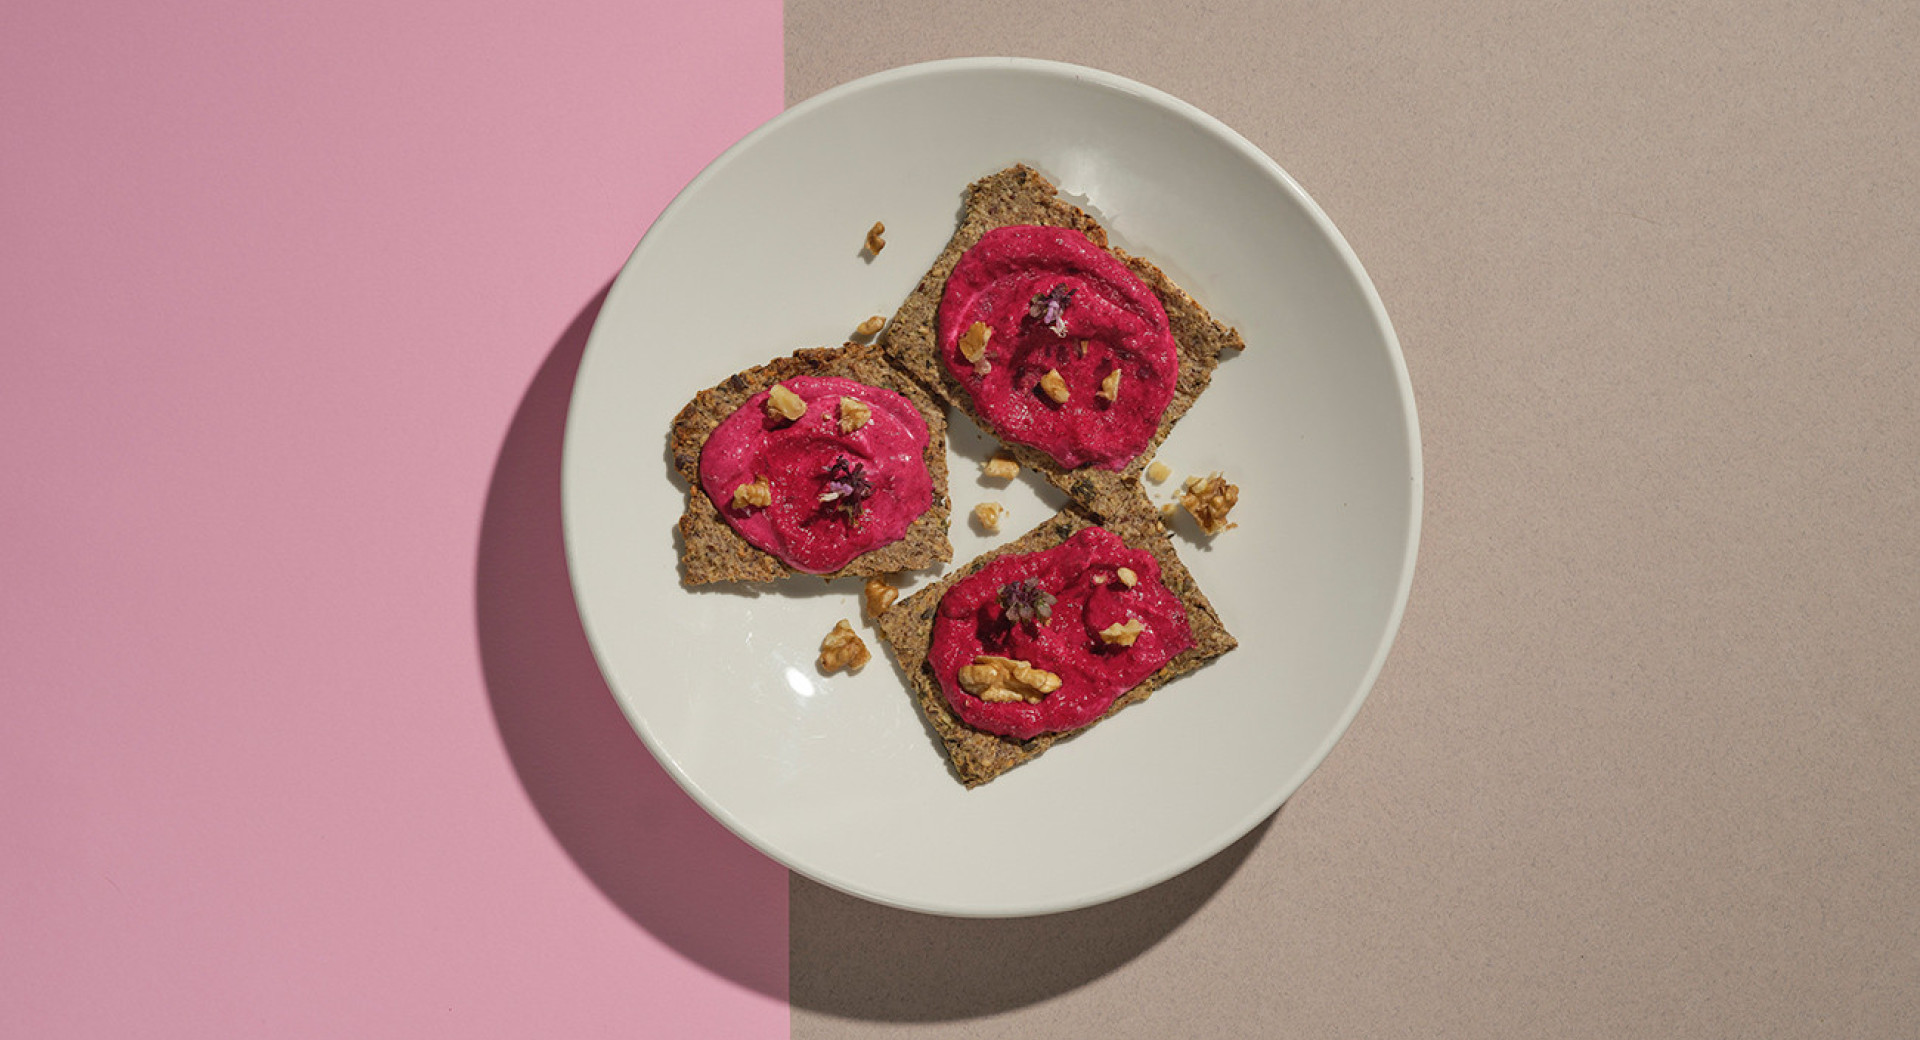 A white plate on a pink and brown background. Neatly arranged brown crackers with pink sauce are placed on the plate. Pumpkin seeds are sprinkled on top for decoration.